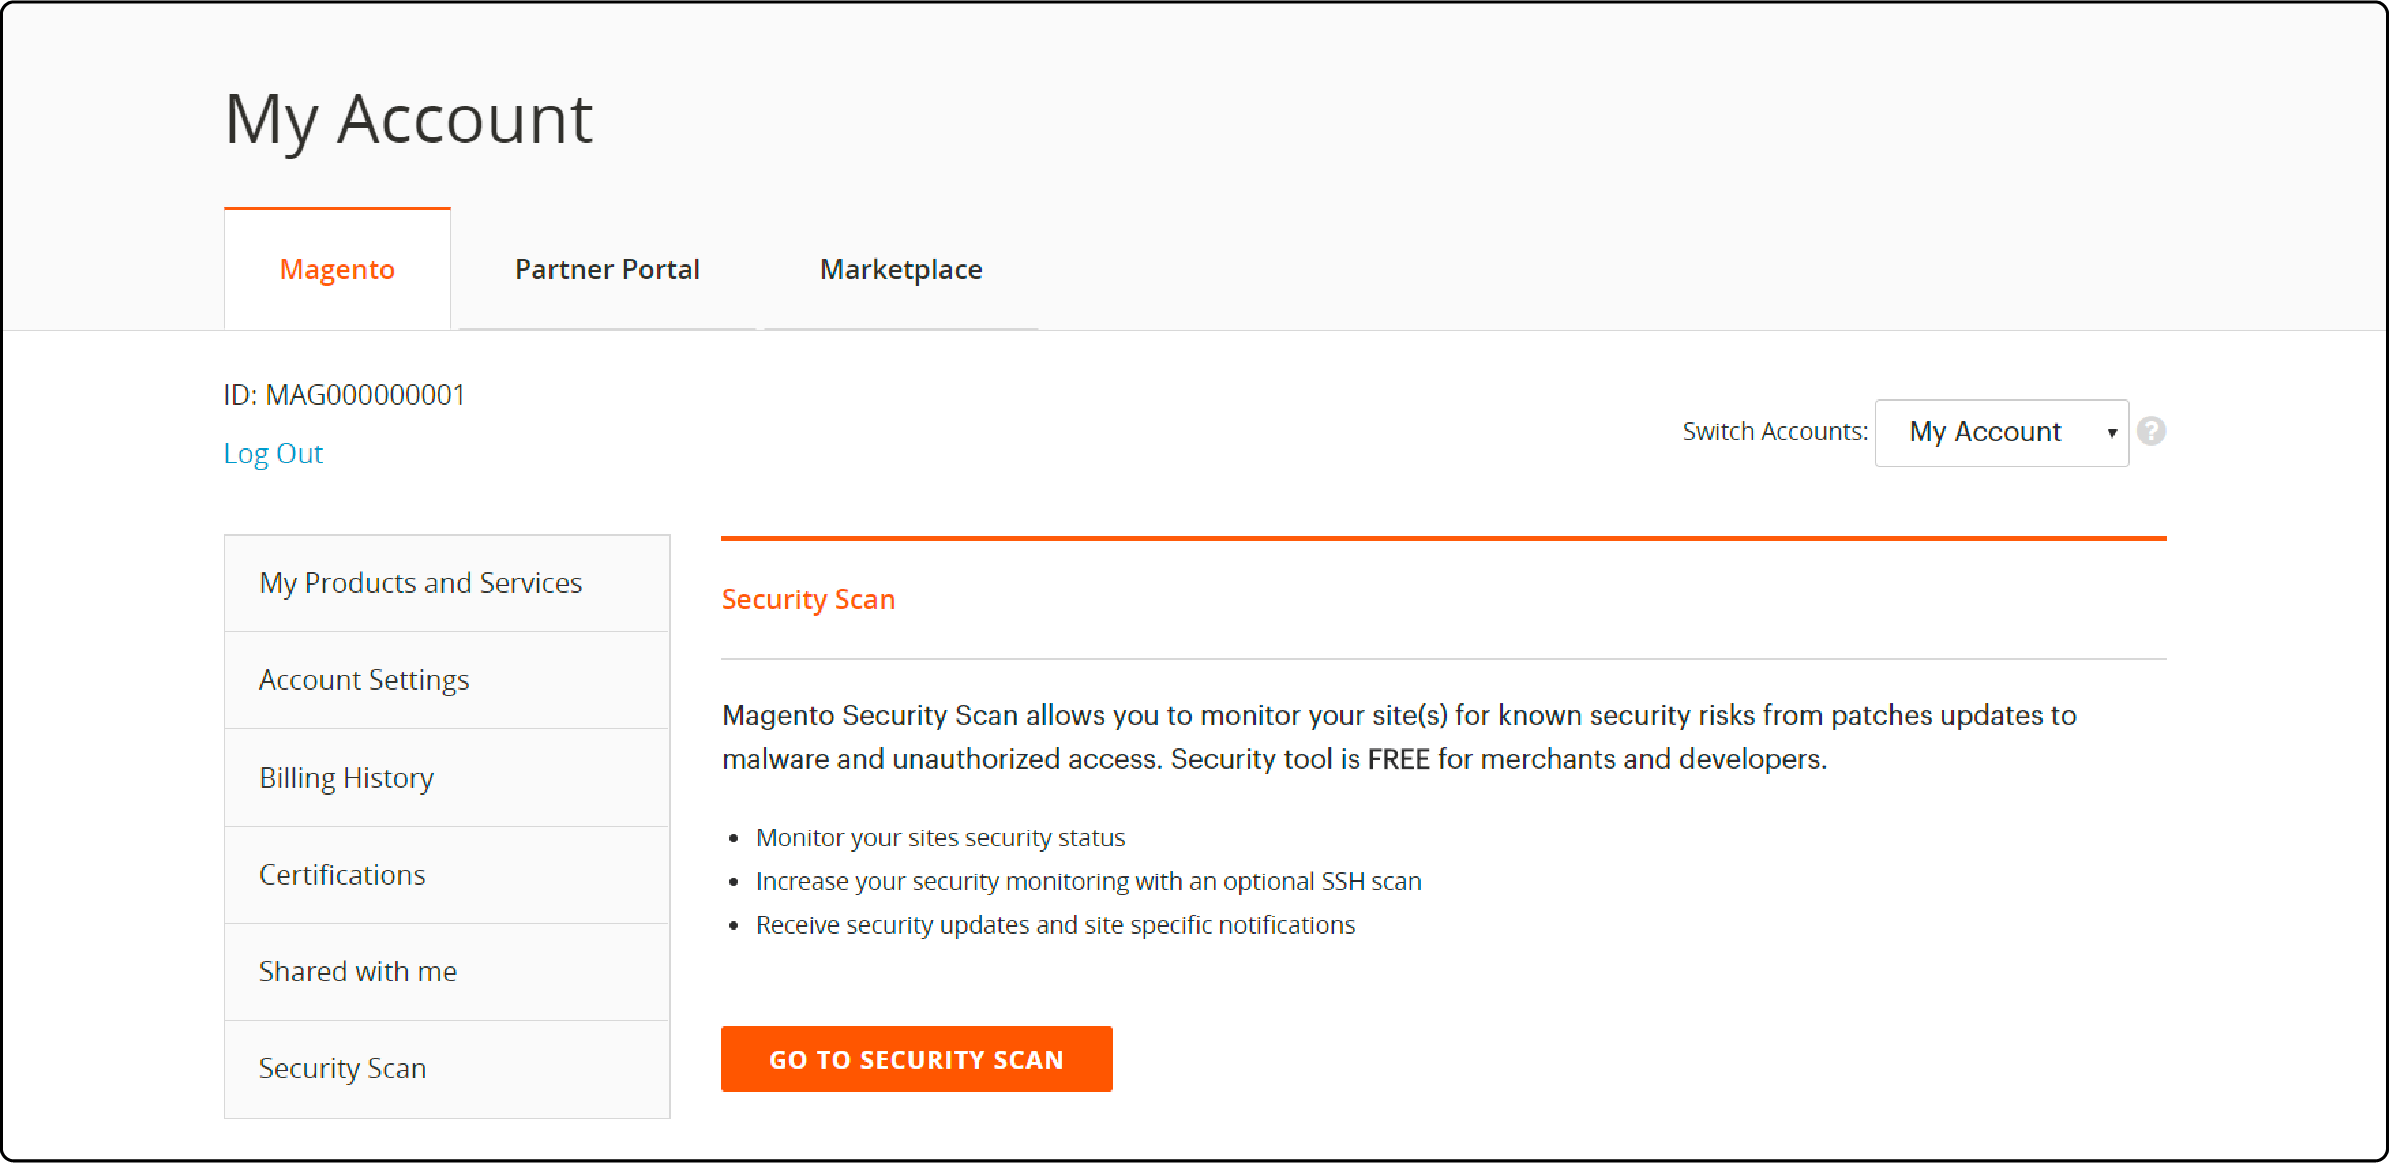 Step-by-step guide on activating Magento Security Scan in Magento 2 account